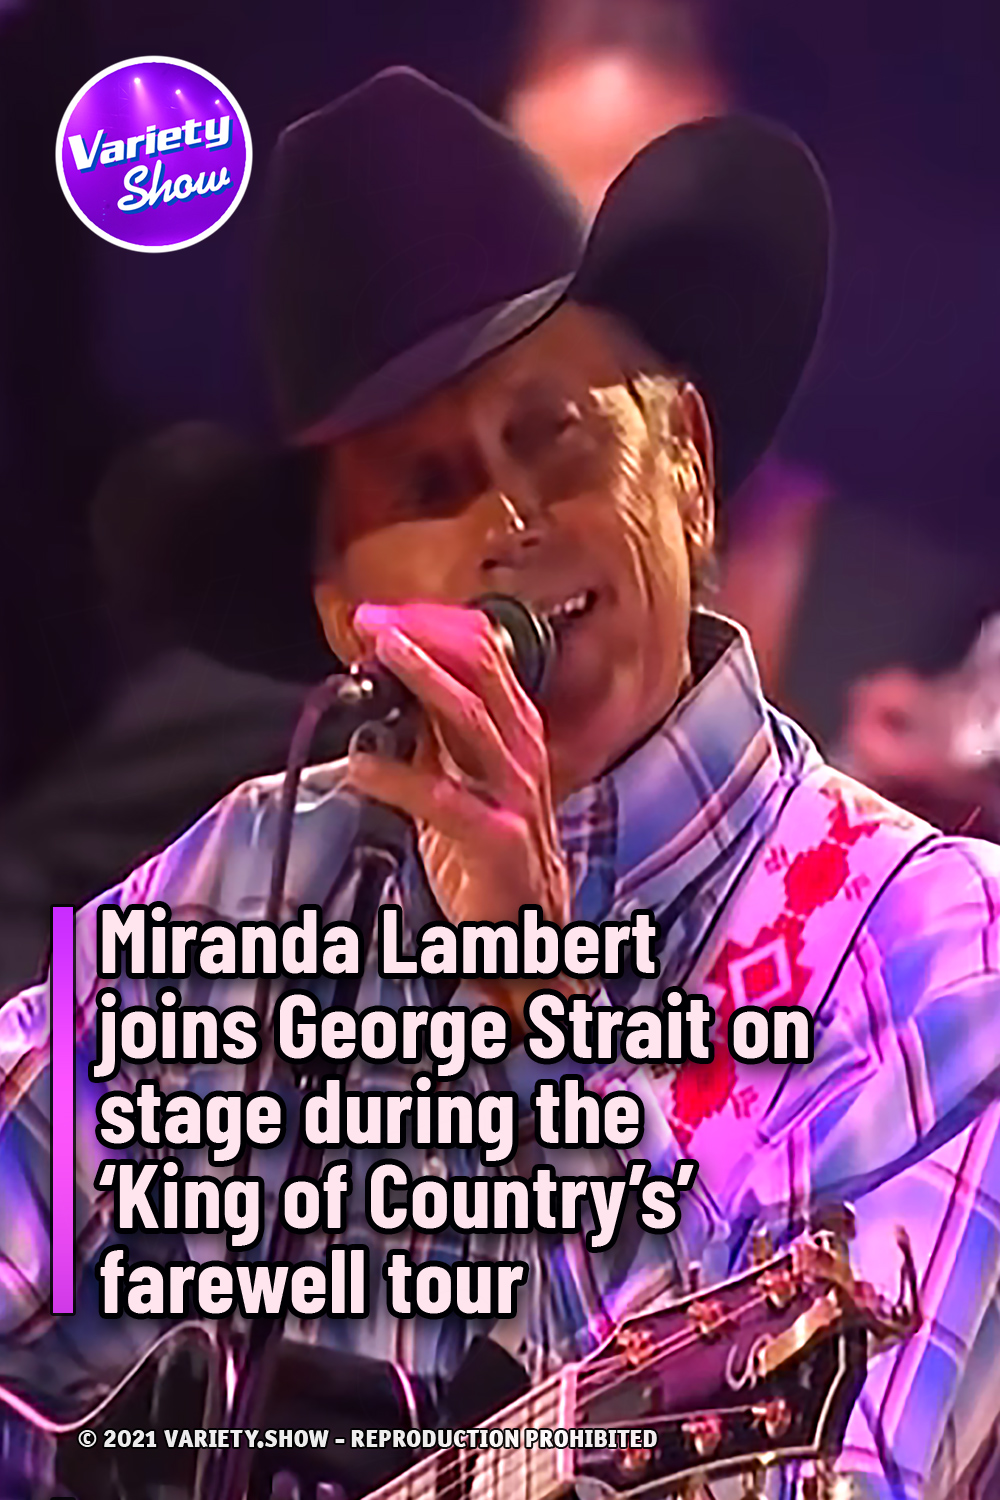 Miranda Lambert joins George Strait on stage during the ‘King of Country’s’ farewell tour